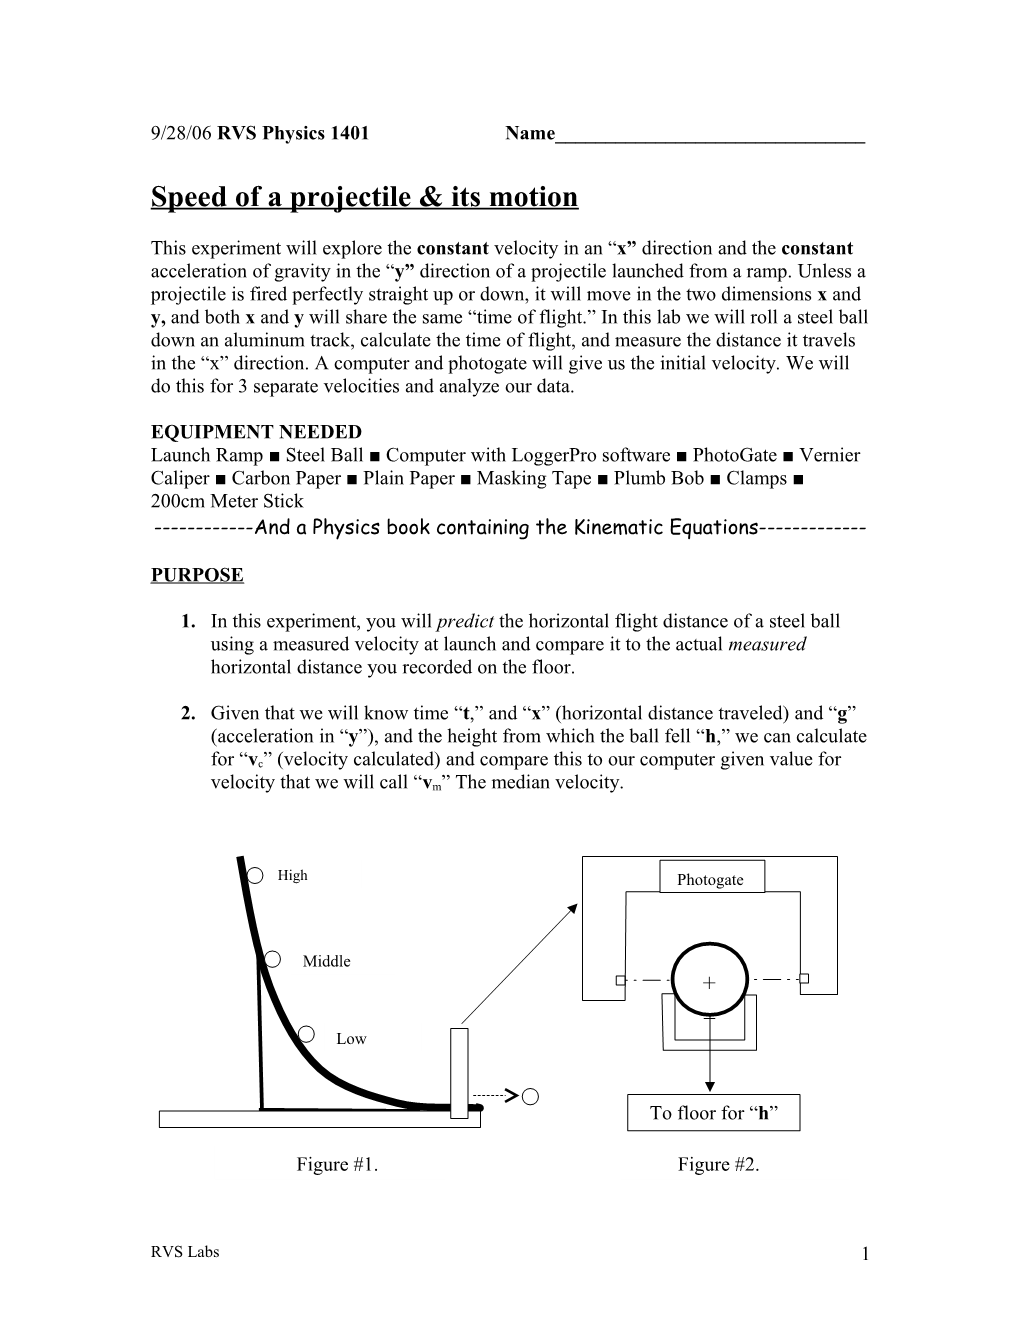 This Experiment Concerns Constant Velocity in the X Direction and Constant Acceleration